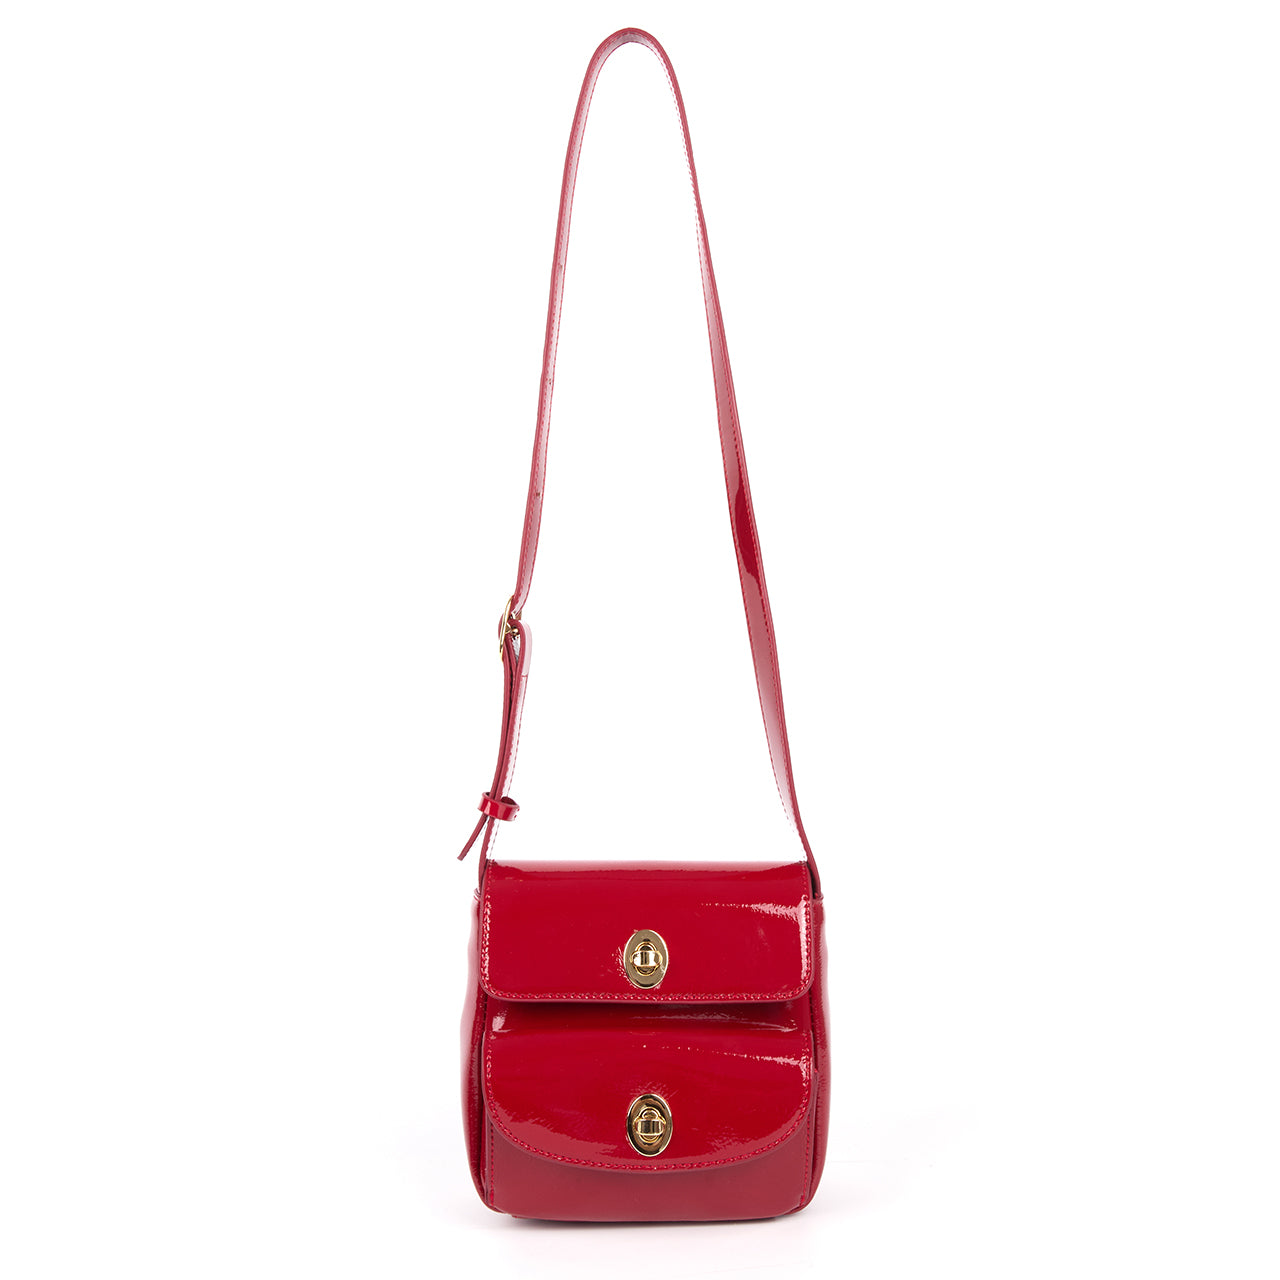 A-1563 Patent Leather Cross Bag